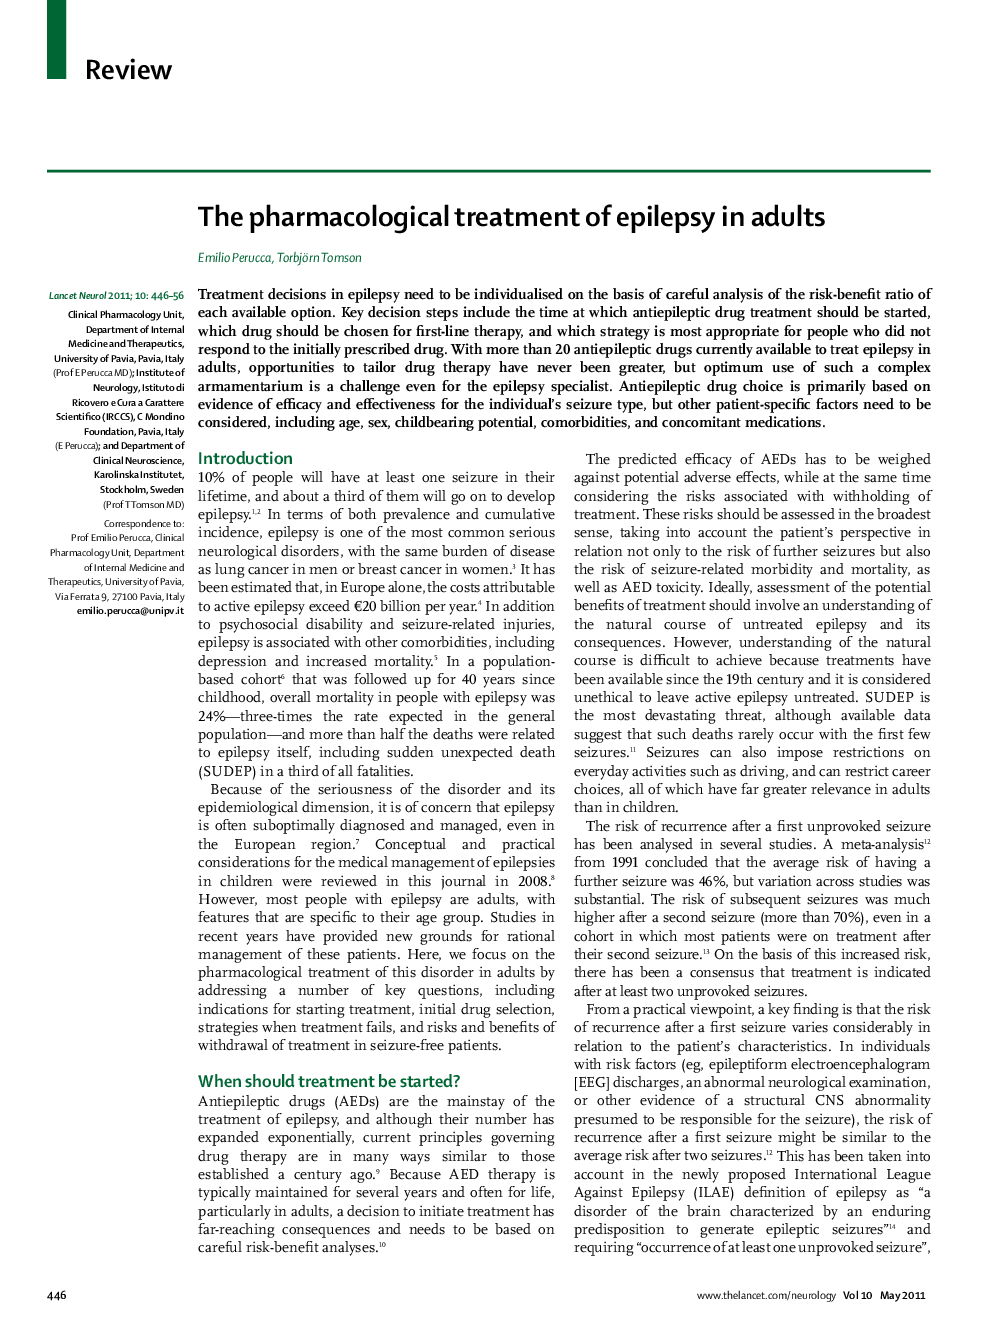 The pharmacological treatment of epilepsy in adults